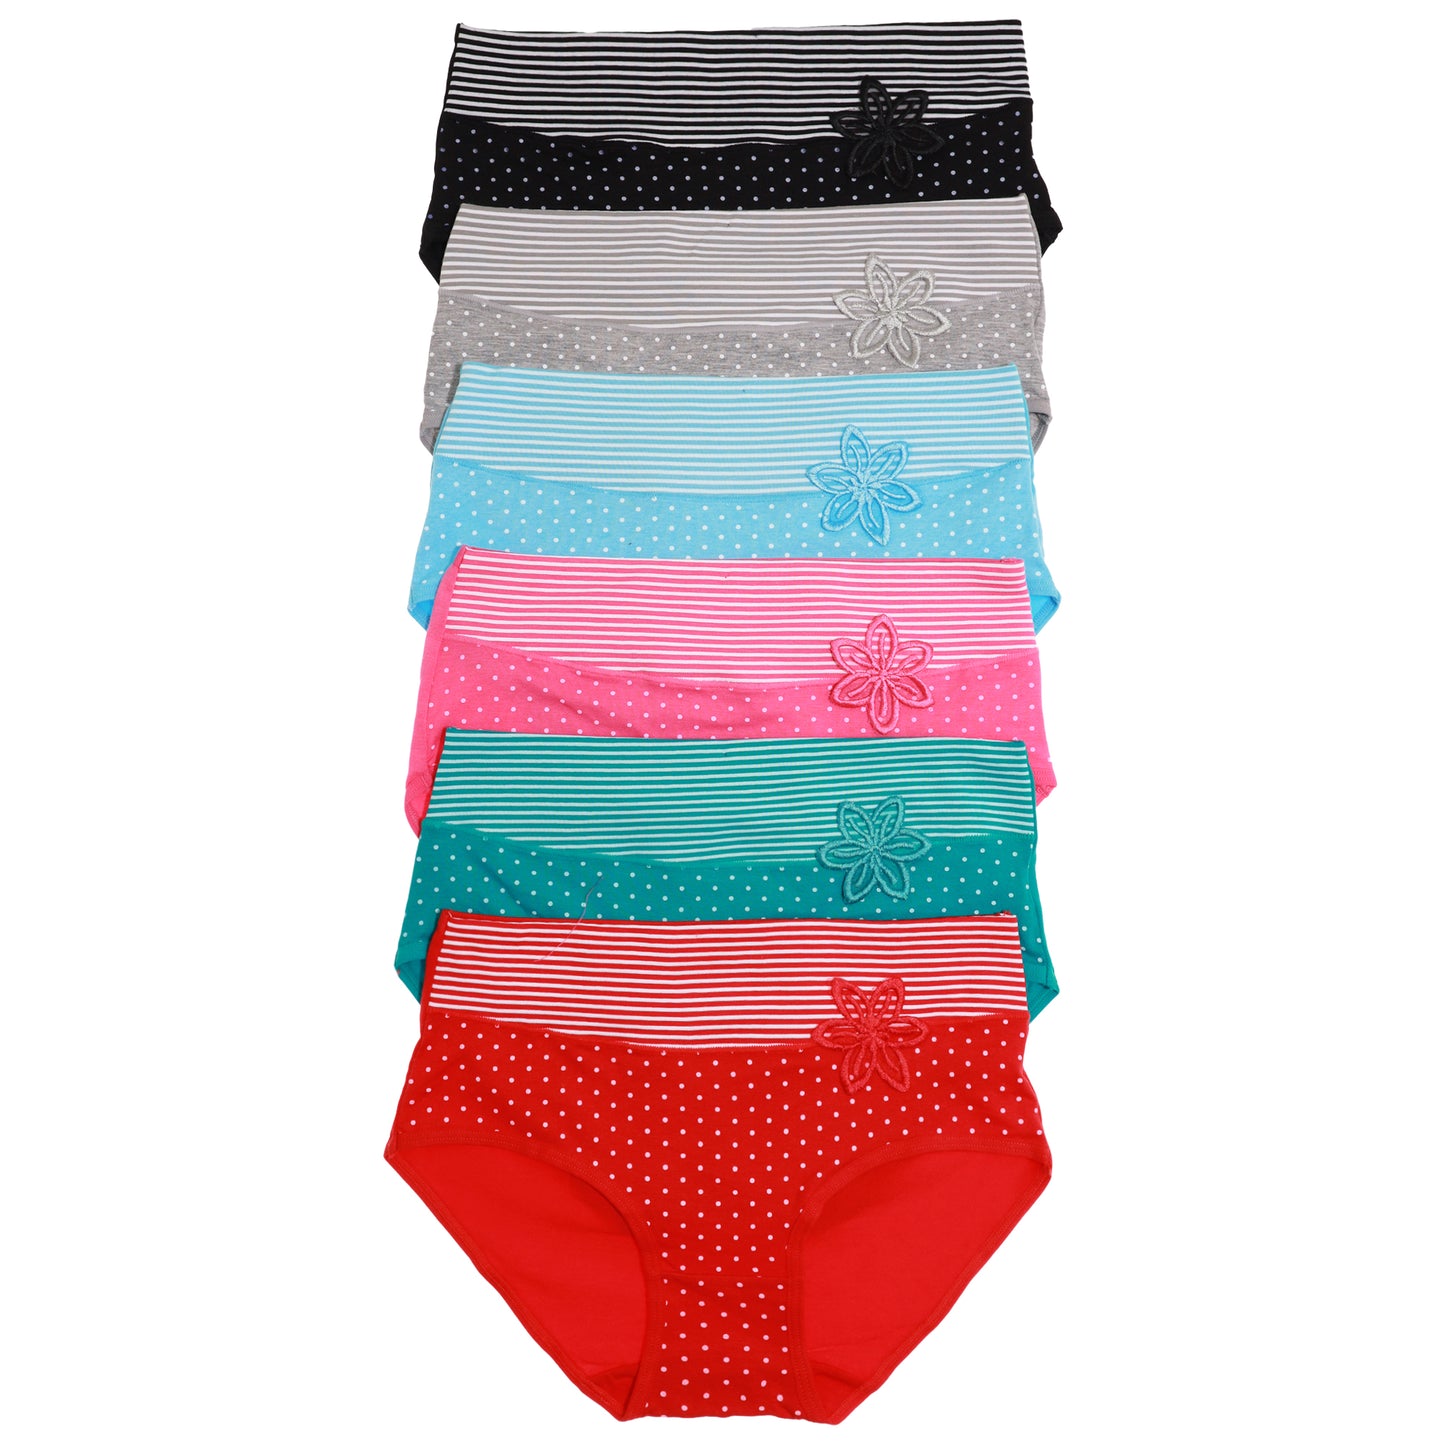 Angelina Cotton Hiphuggers with Polka-Dot Print and Striped Waist (6 or 12 Pack), #G1349